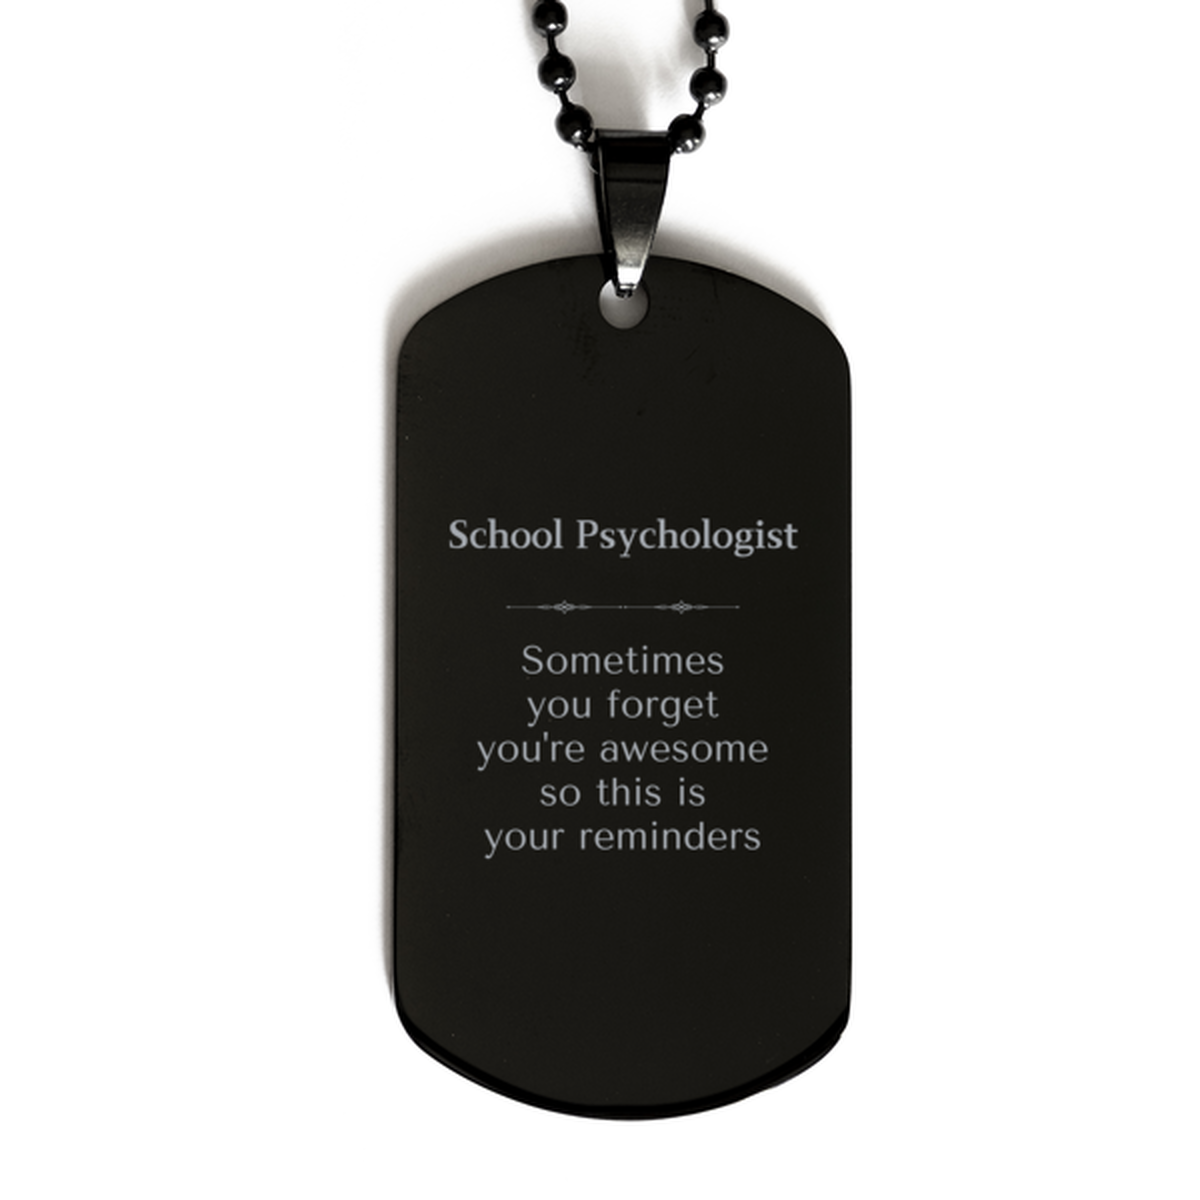 Sentimental School Psychologist Black Dog Tag, School Psychologist Sometimes you forget you're awesome so this is your reminders, Graduation Christmas Birthday Gifts for School Psychologist, Men, Women, Coworkers